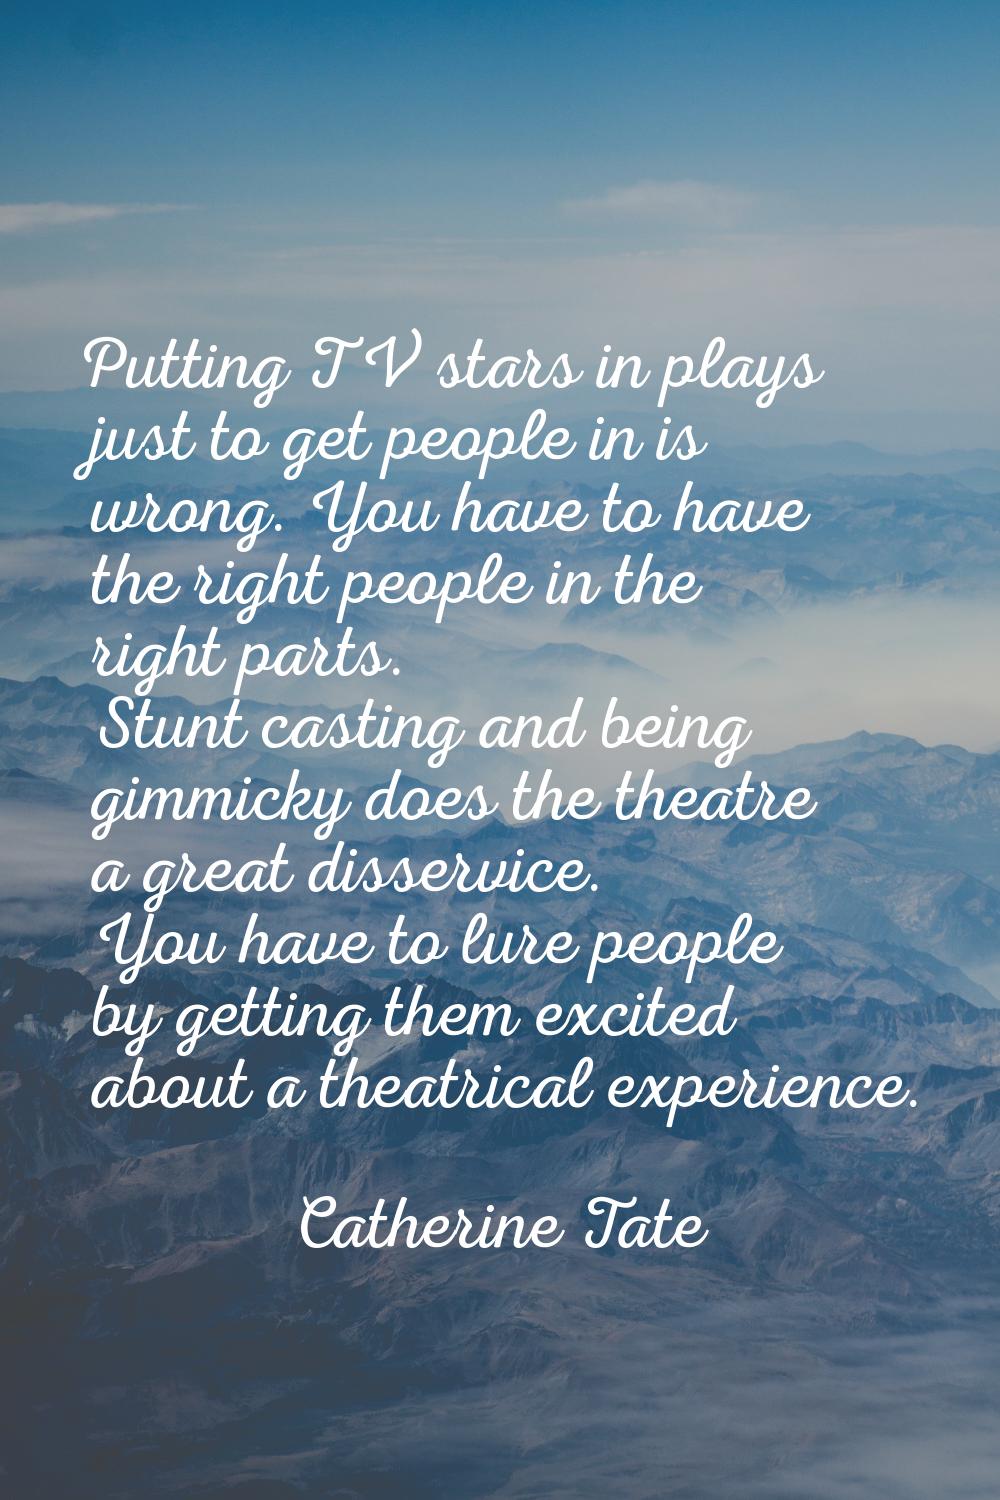 Putting TV stars in plays just to get people in is wrong. You have to have the right people in the 